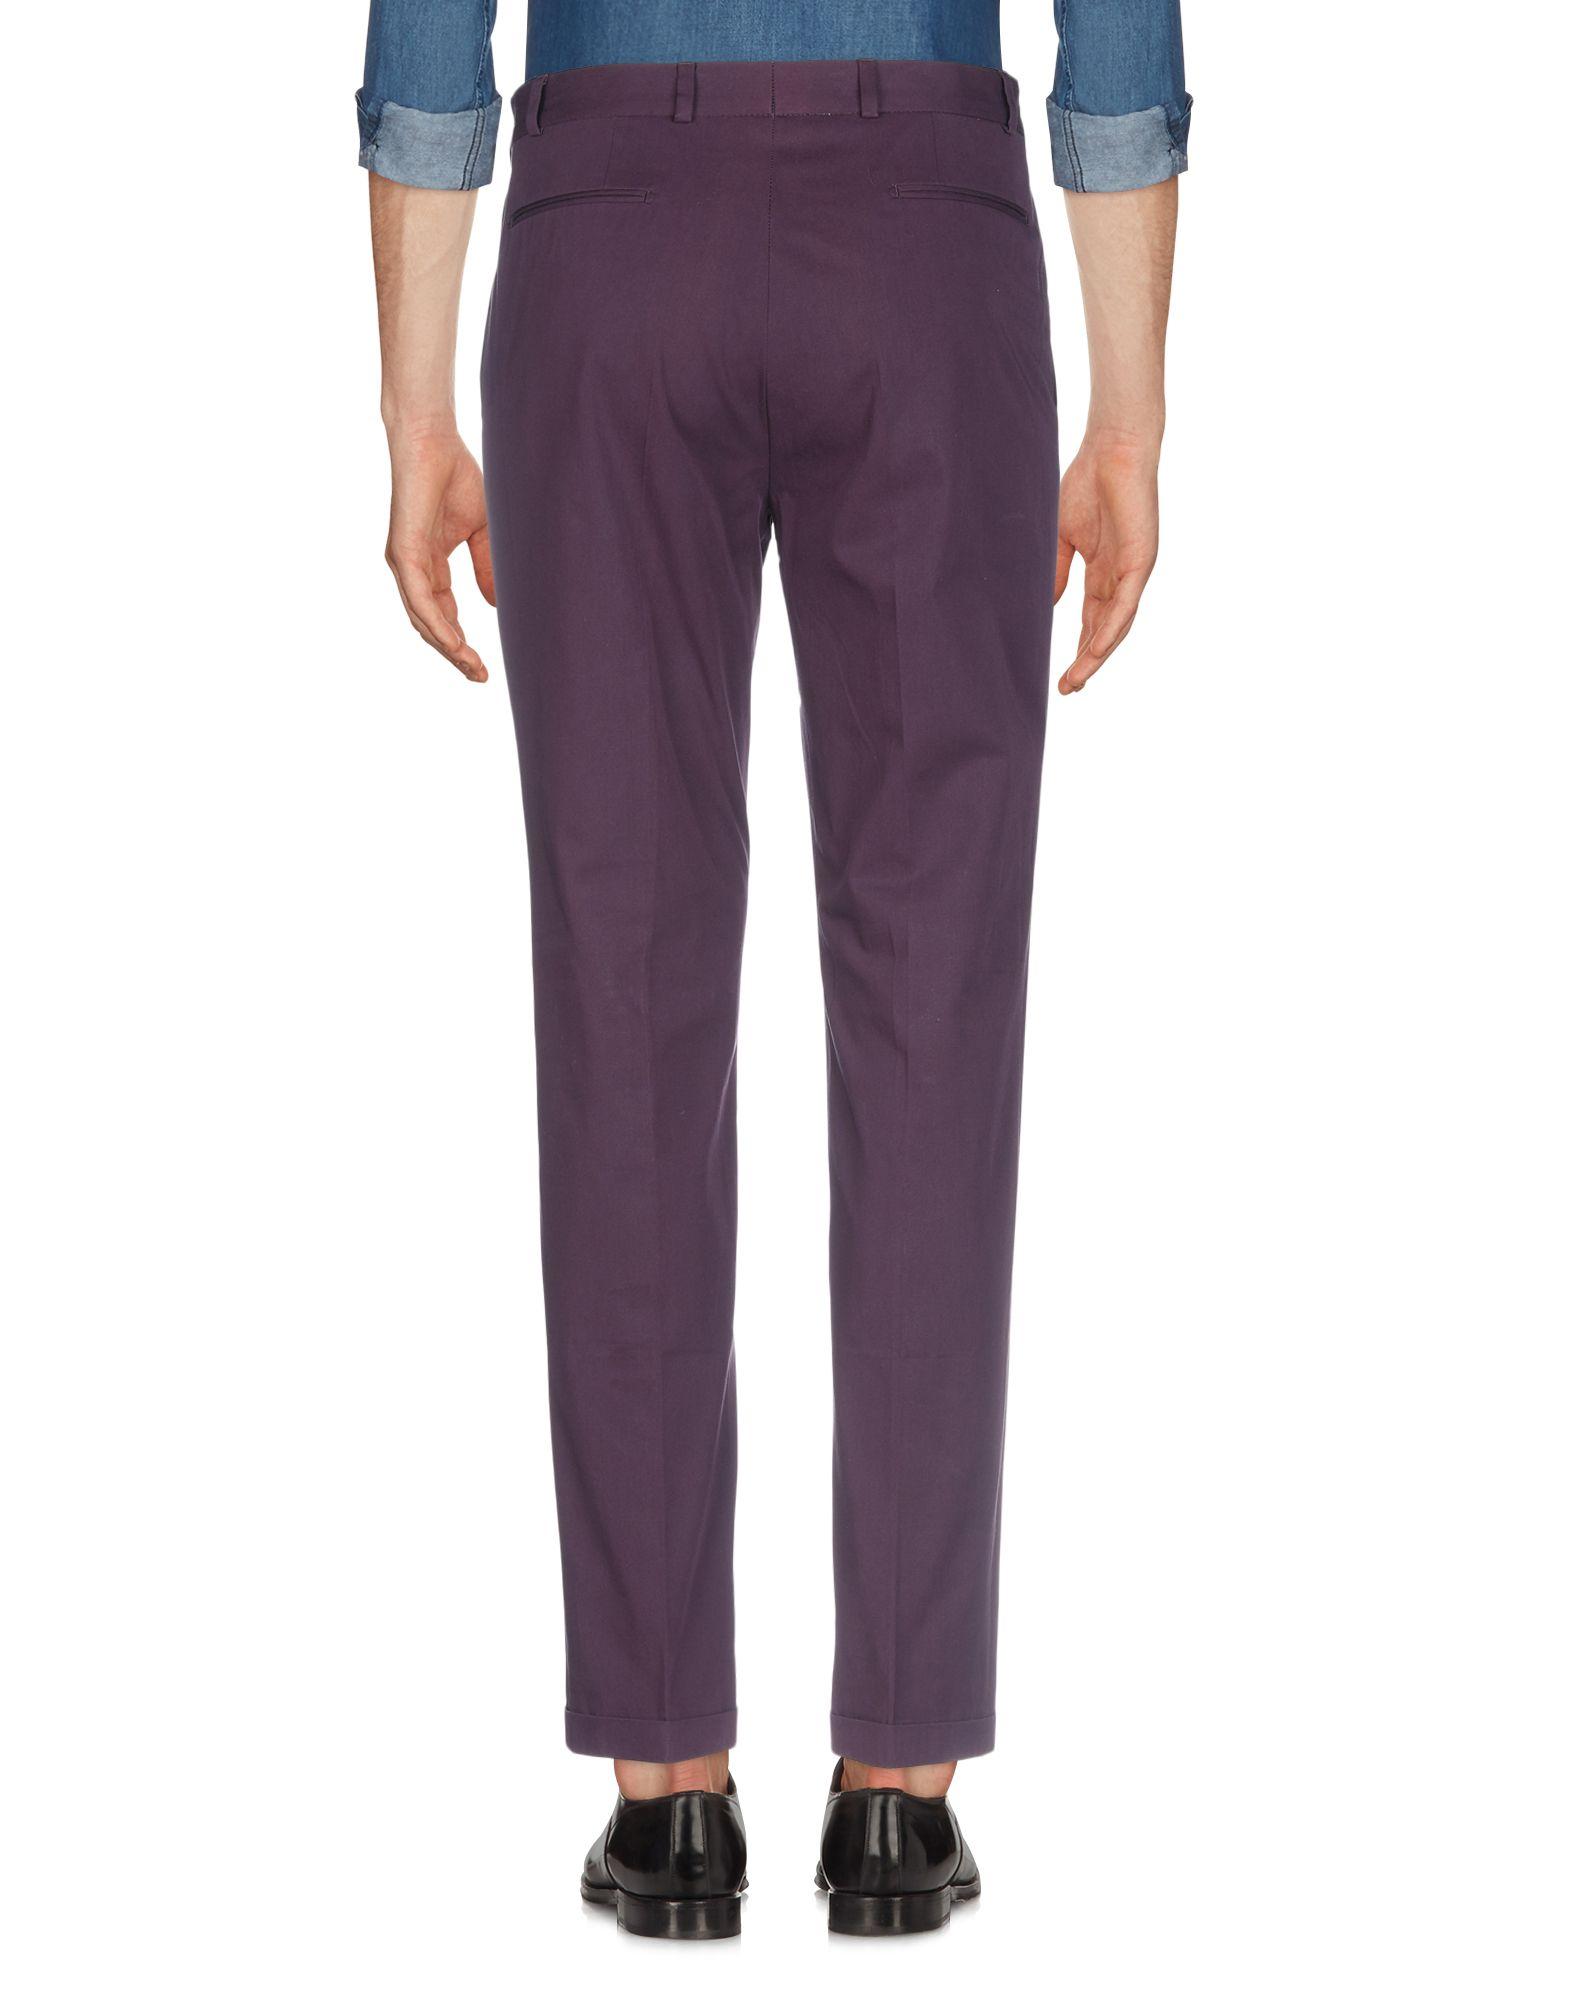 PS by Paul Smith Casual Pants in Purple for Men - Lyst